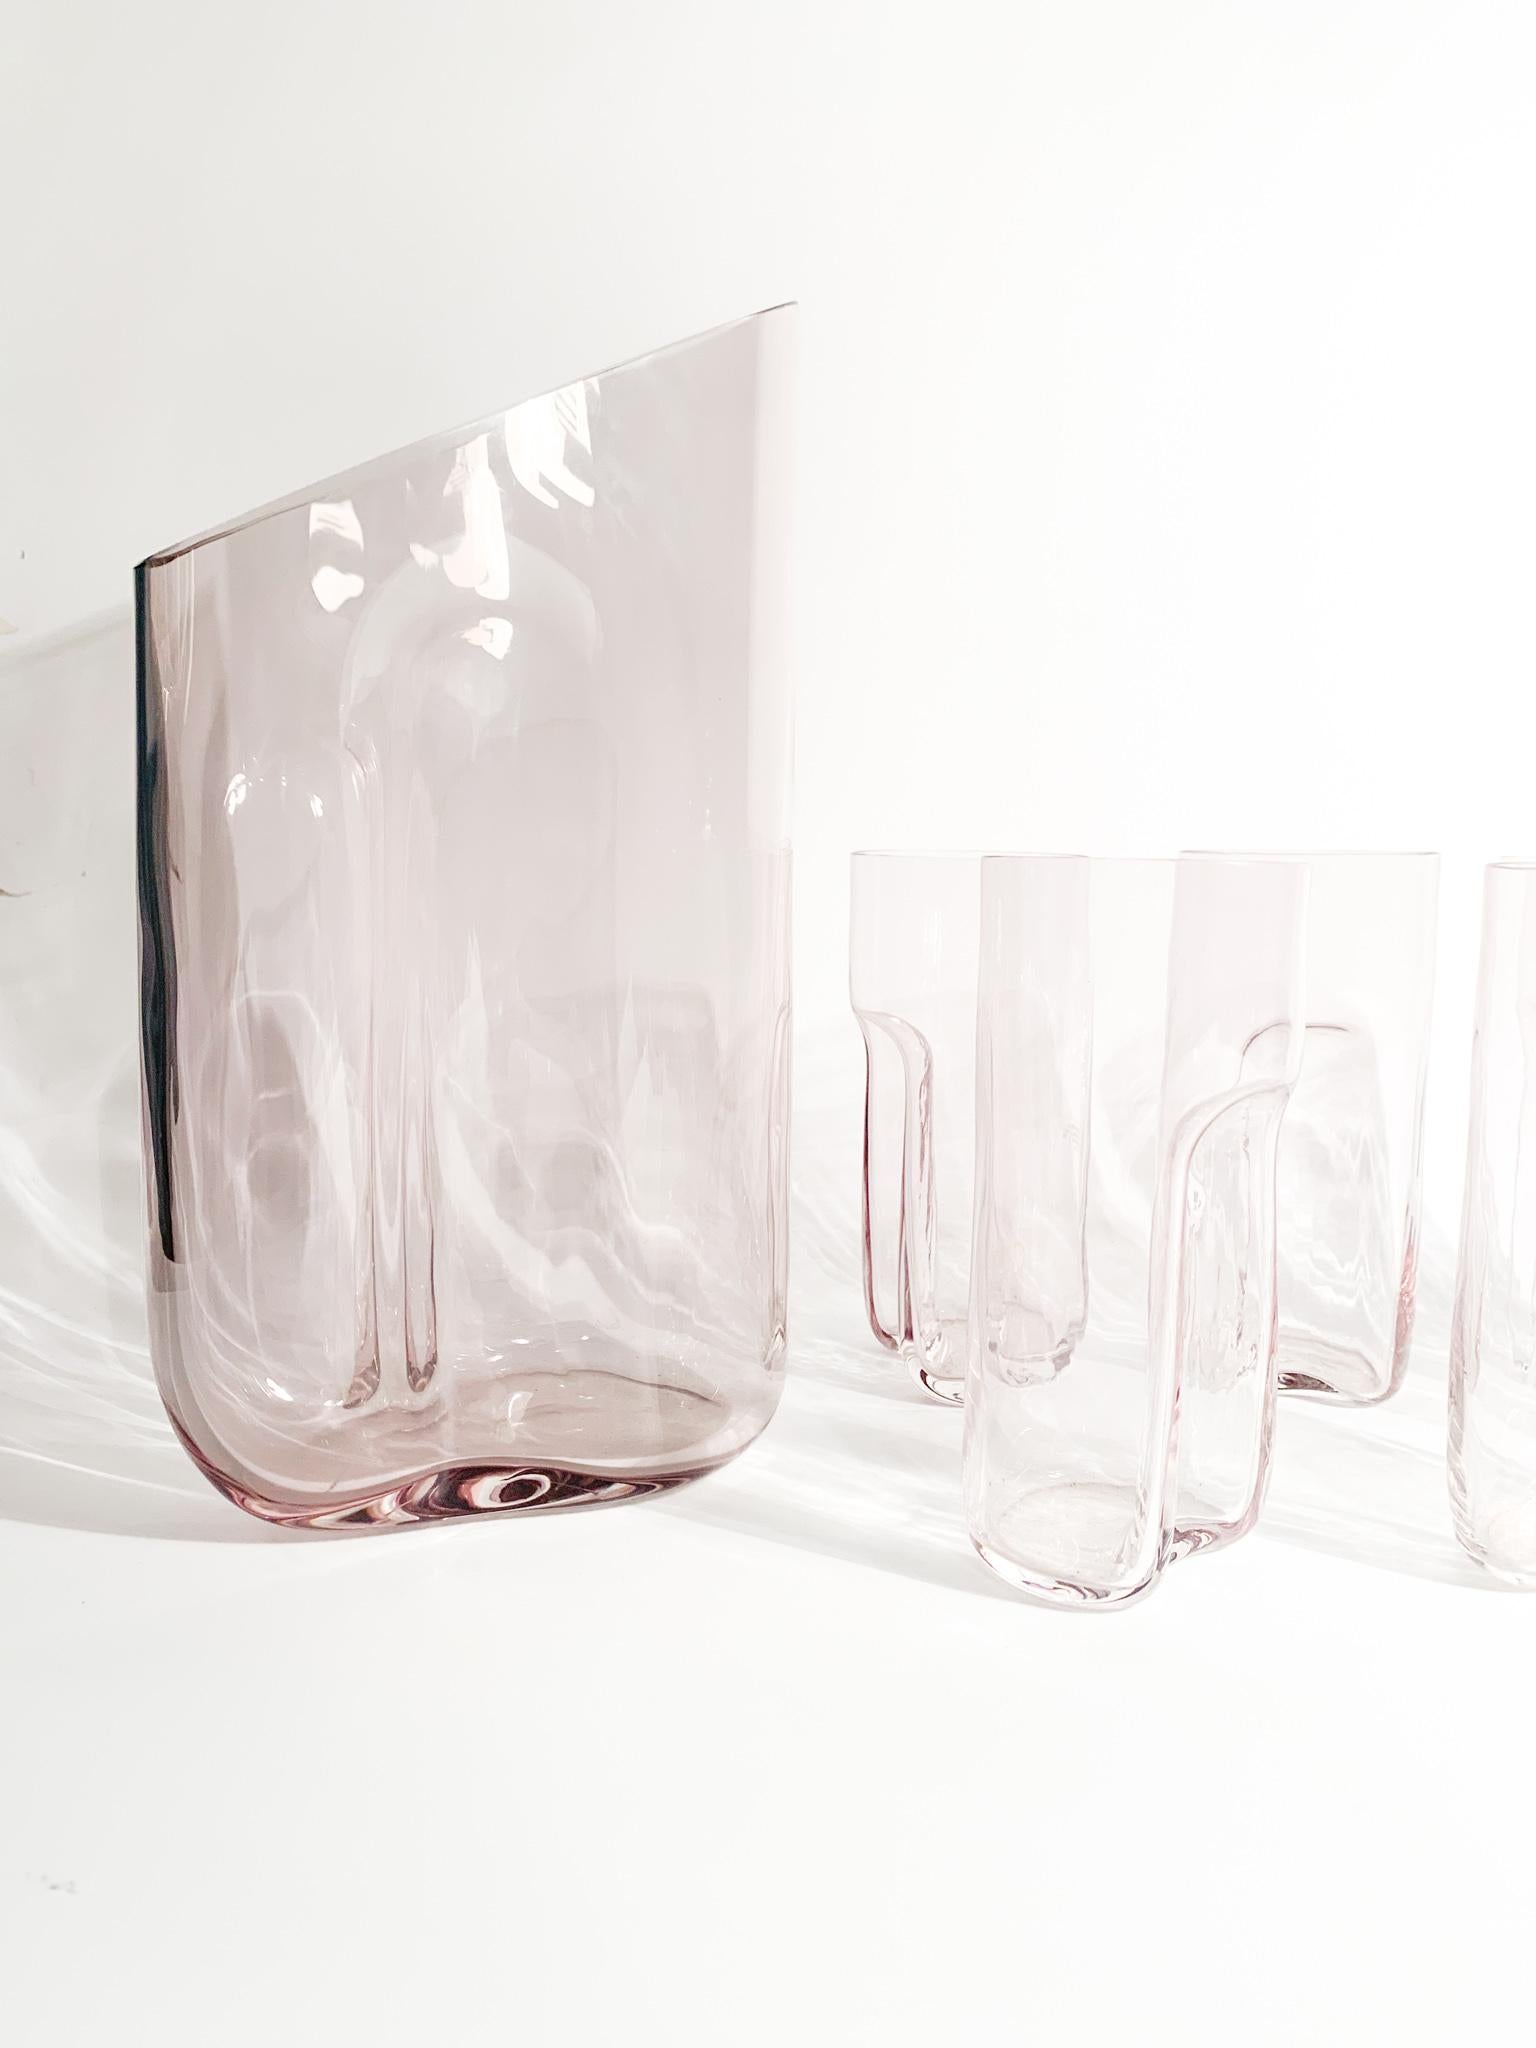 Set of 6 glasses with pink Murano glass carafe, made by Gino Cenedese and Maurizio Albarelli in the 1970s

Carafe - Ø 15 cm h 27 cm

Glasses - Ø 6 cm h 14 cm

Simone Cenedese has been producing artistic objects in the glass factory that bears his